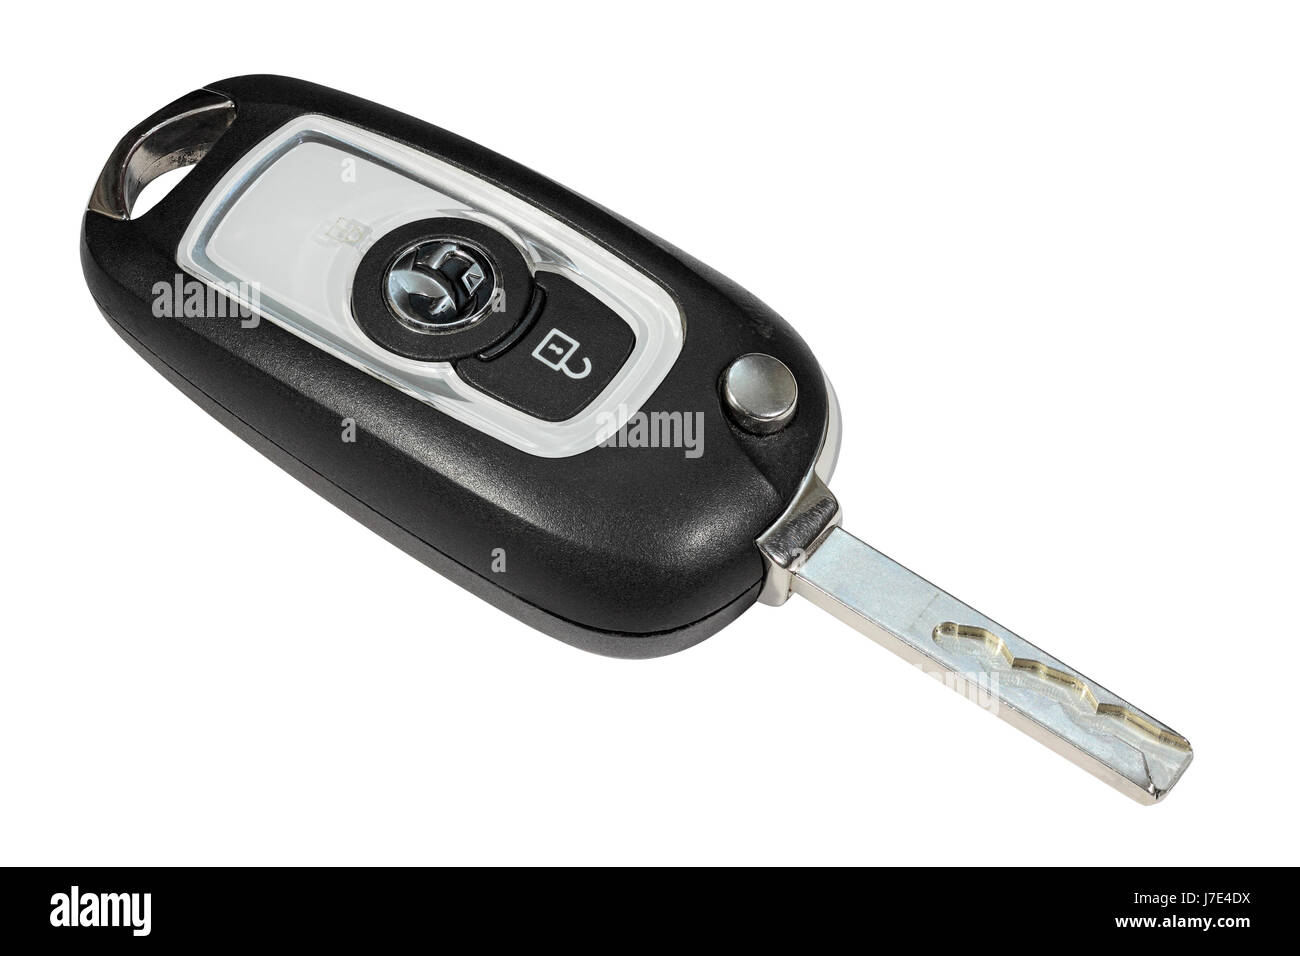 A Vauxhall Astra K Car Key isolated on a white background Stock Photo